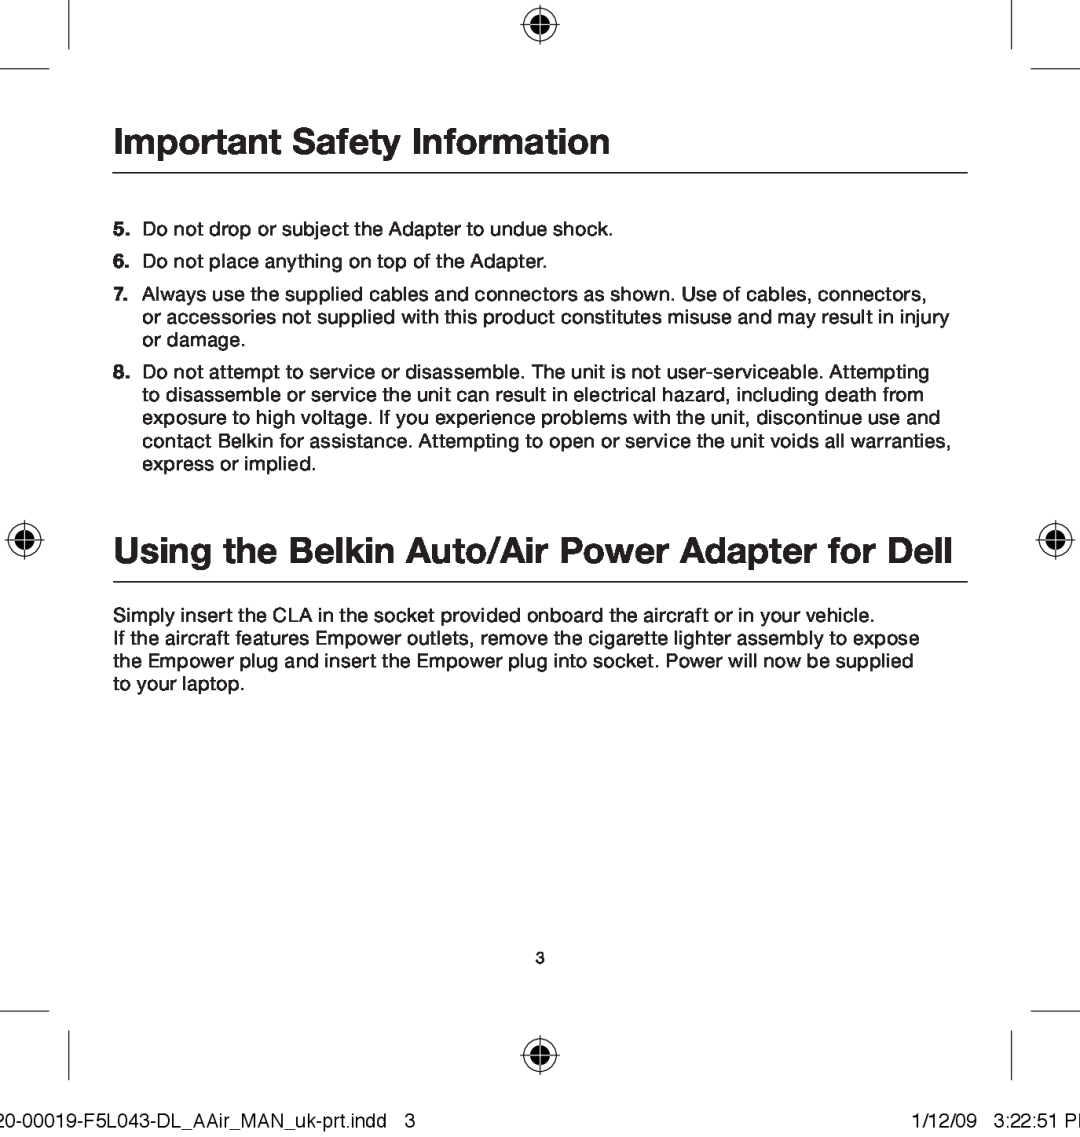 Belkin 0-00019-F5L043 user manual Using the Belkin Auto/Air Power Adapter for Dell, Important Safety Information 